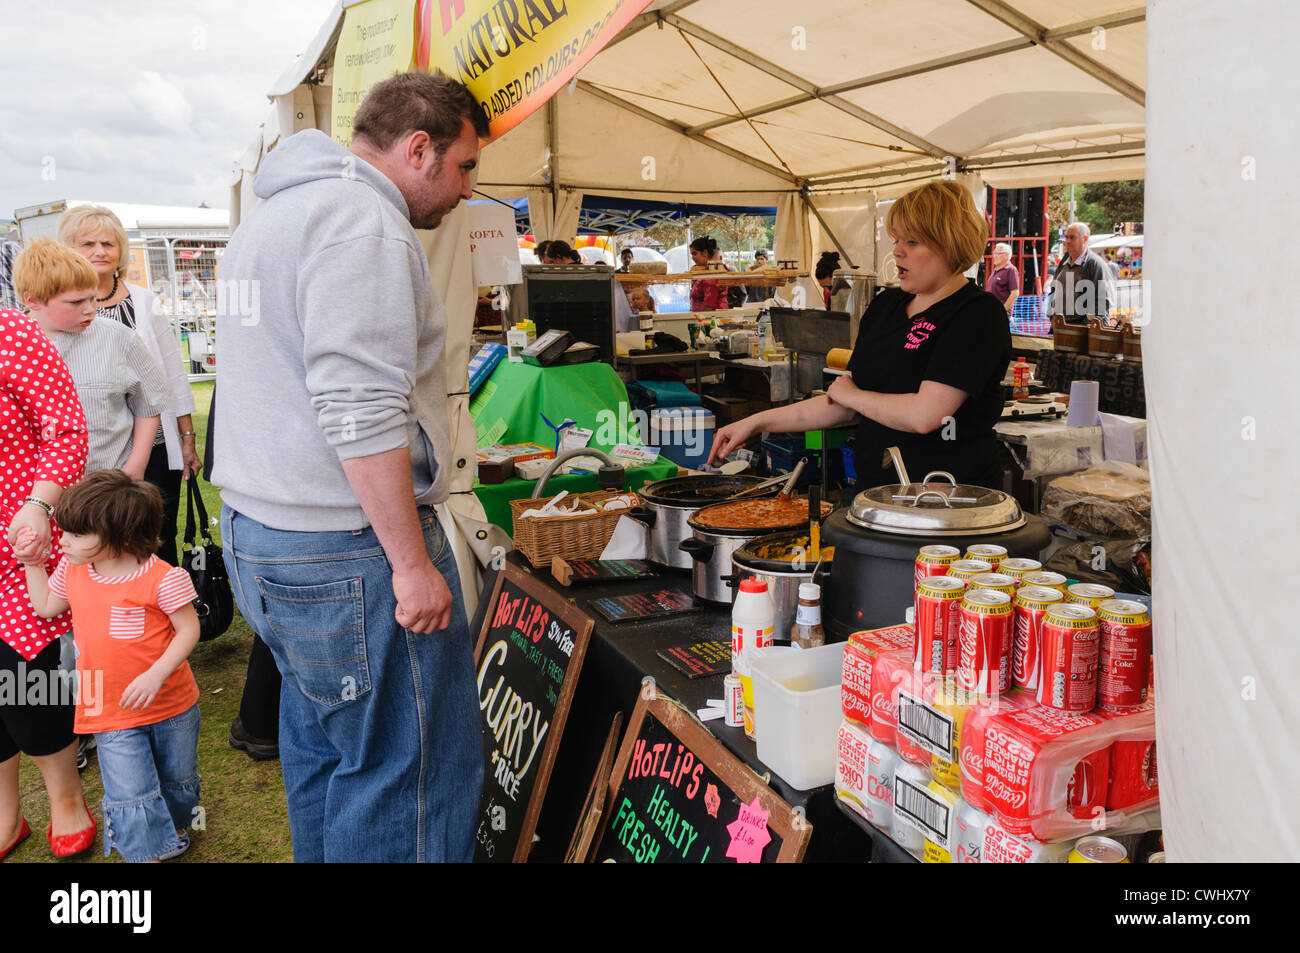 Man buys a curry from a market stall Stock Photo